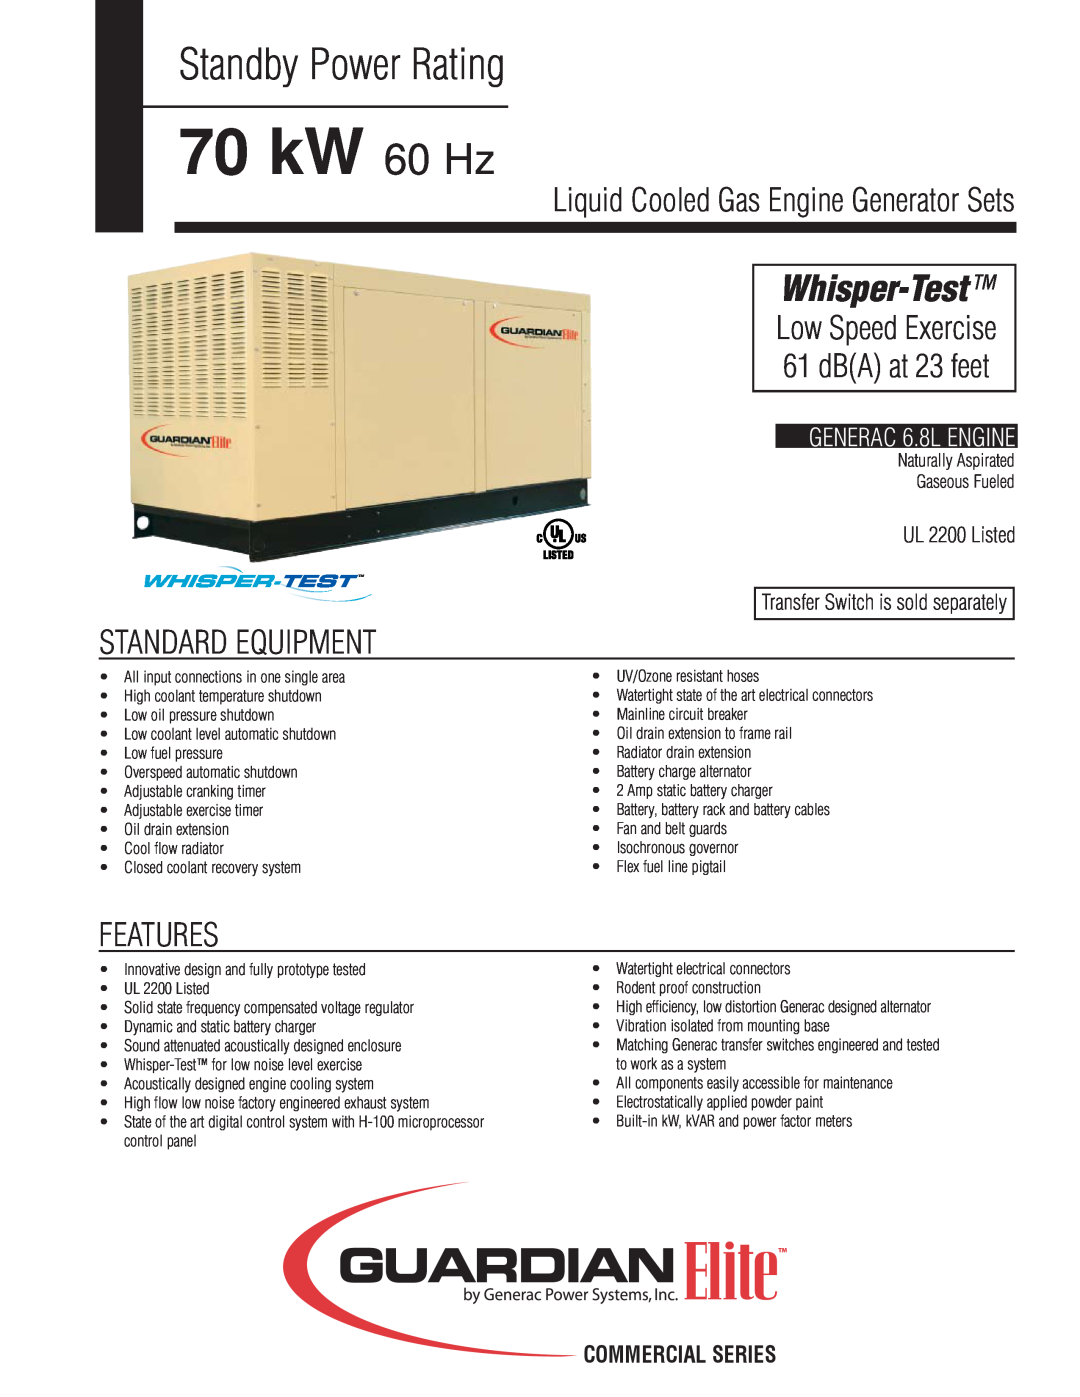 Generac Power Systems UL 2200 manual Standby Power Rating, 70 kW 60 Hz, Whisper-Test, Low Speed Exercise, dBA at 23 feet 